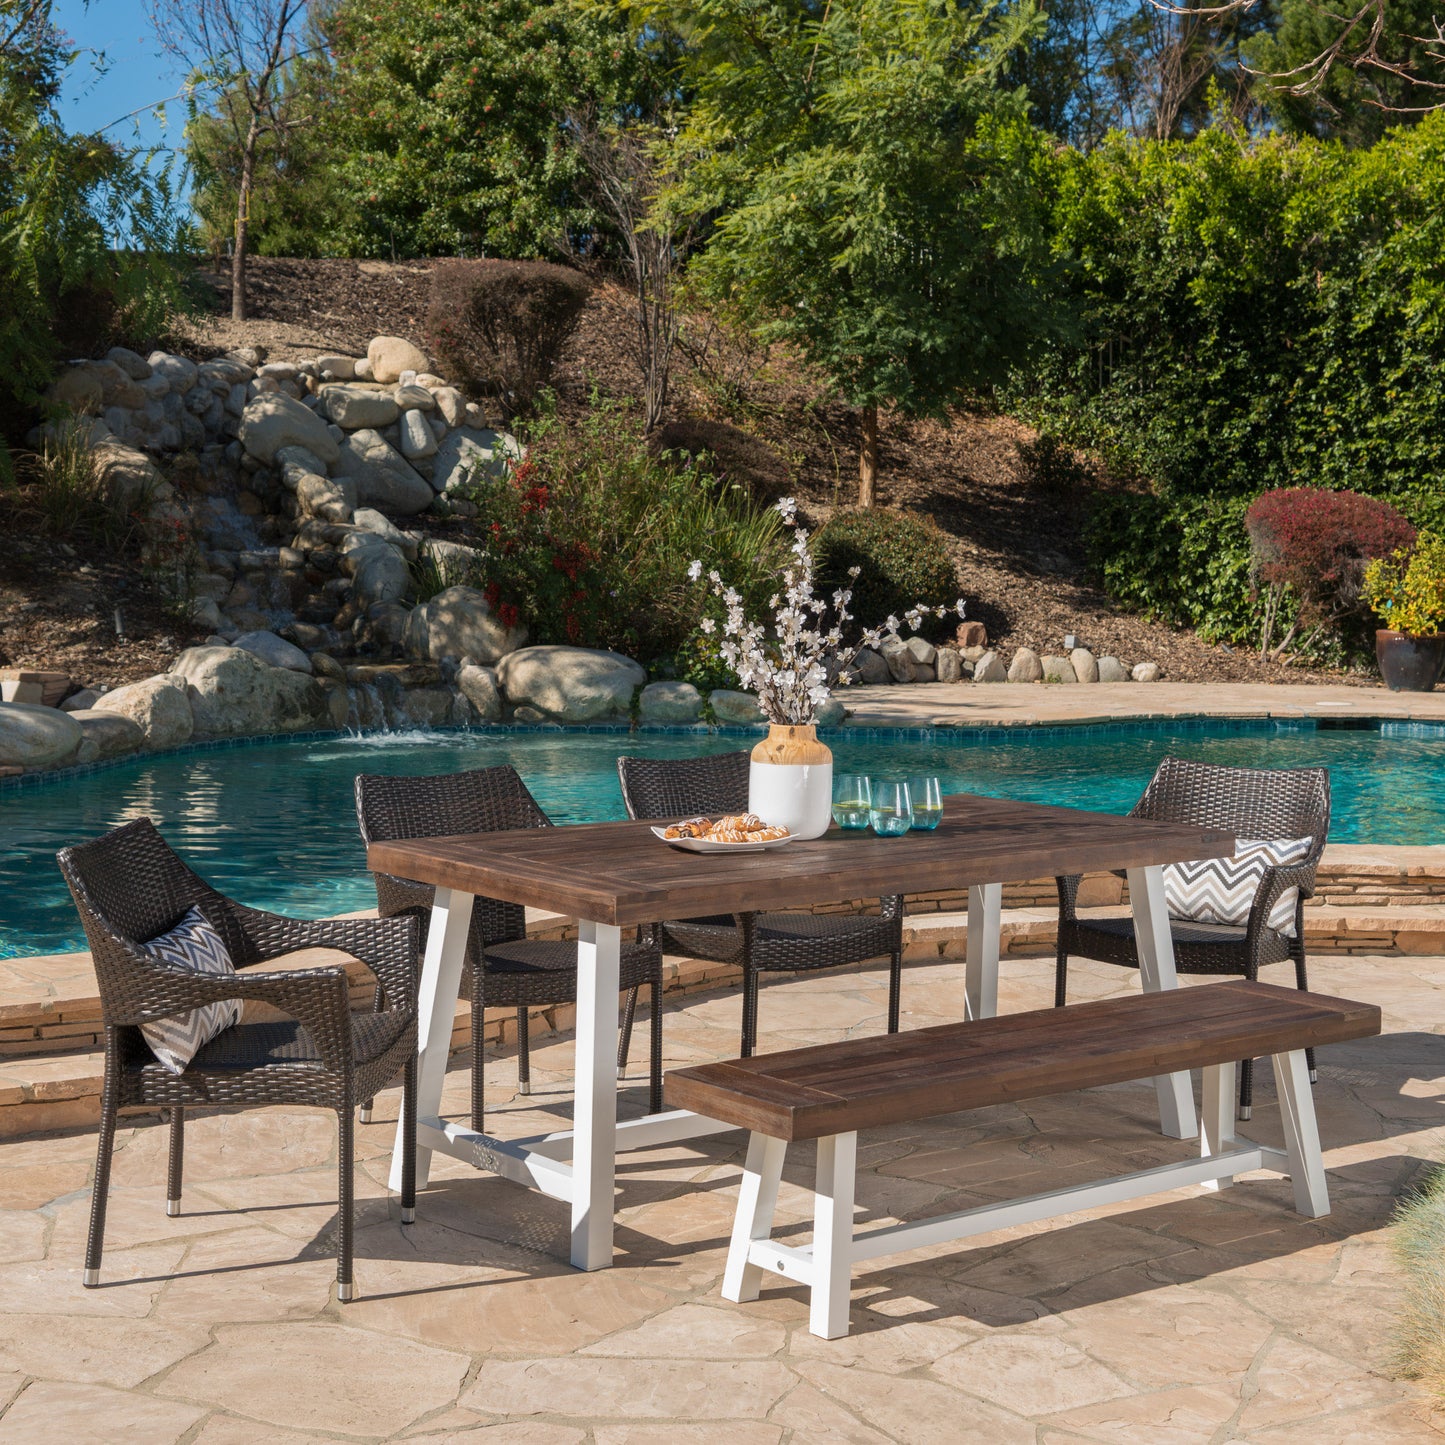 Flora Outdoor 6 Piece Wicker Dining Set with Acacia Wood Table and Bench